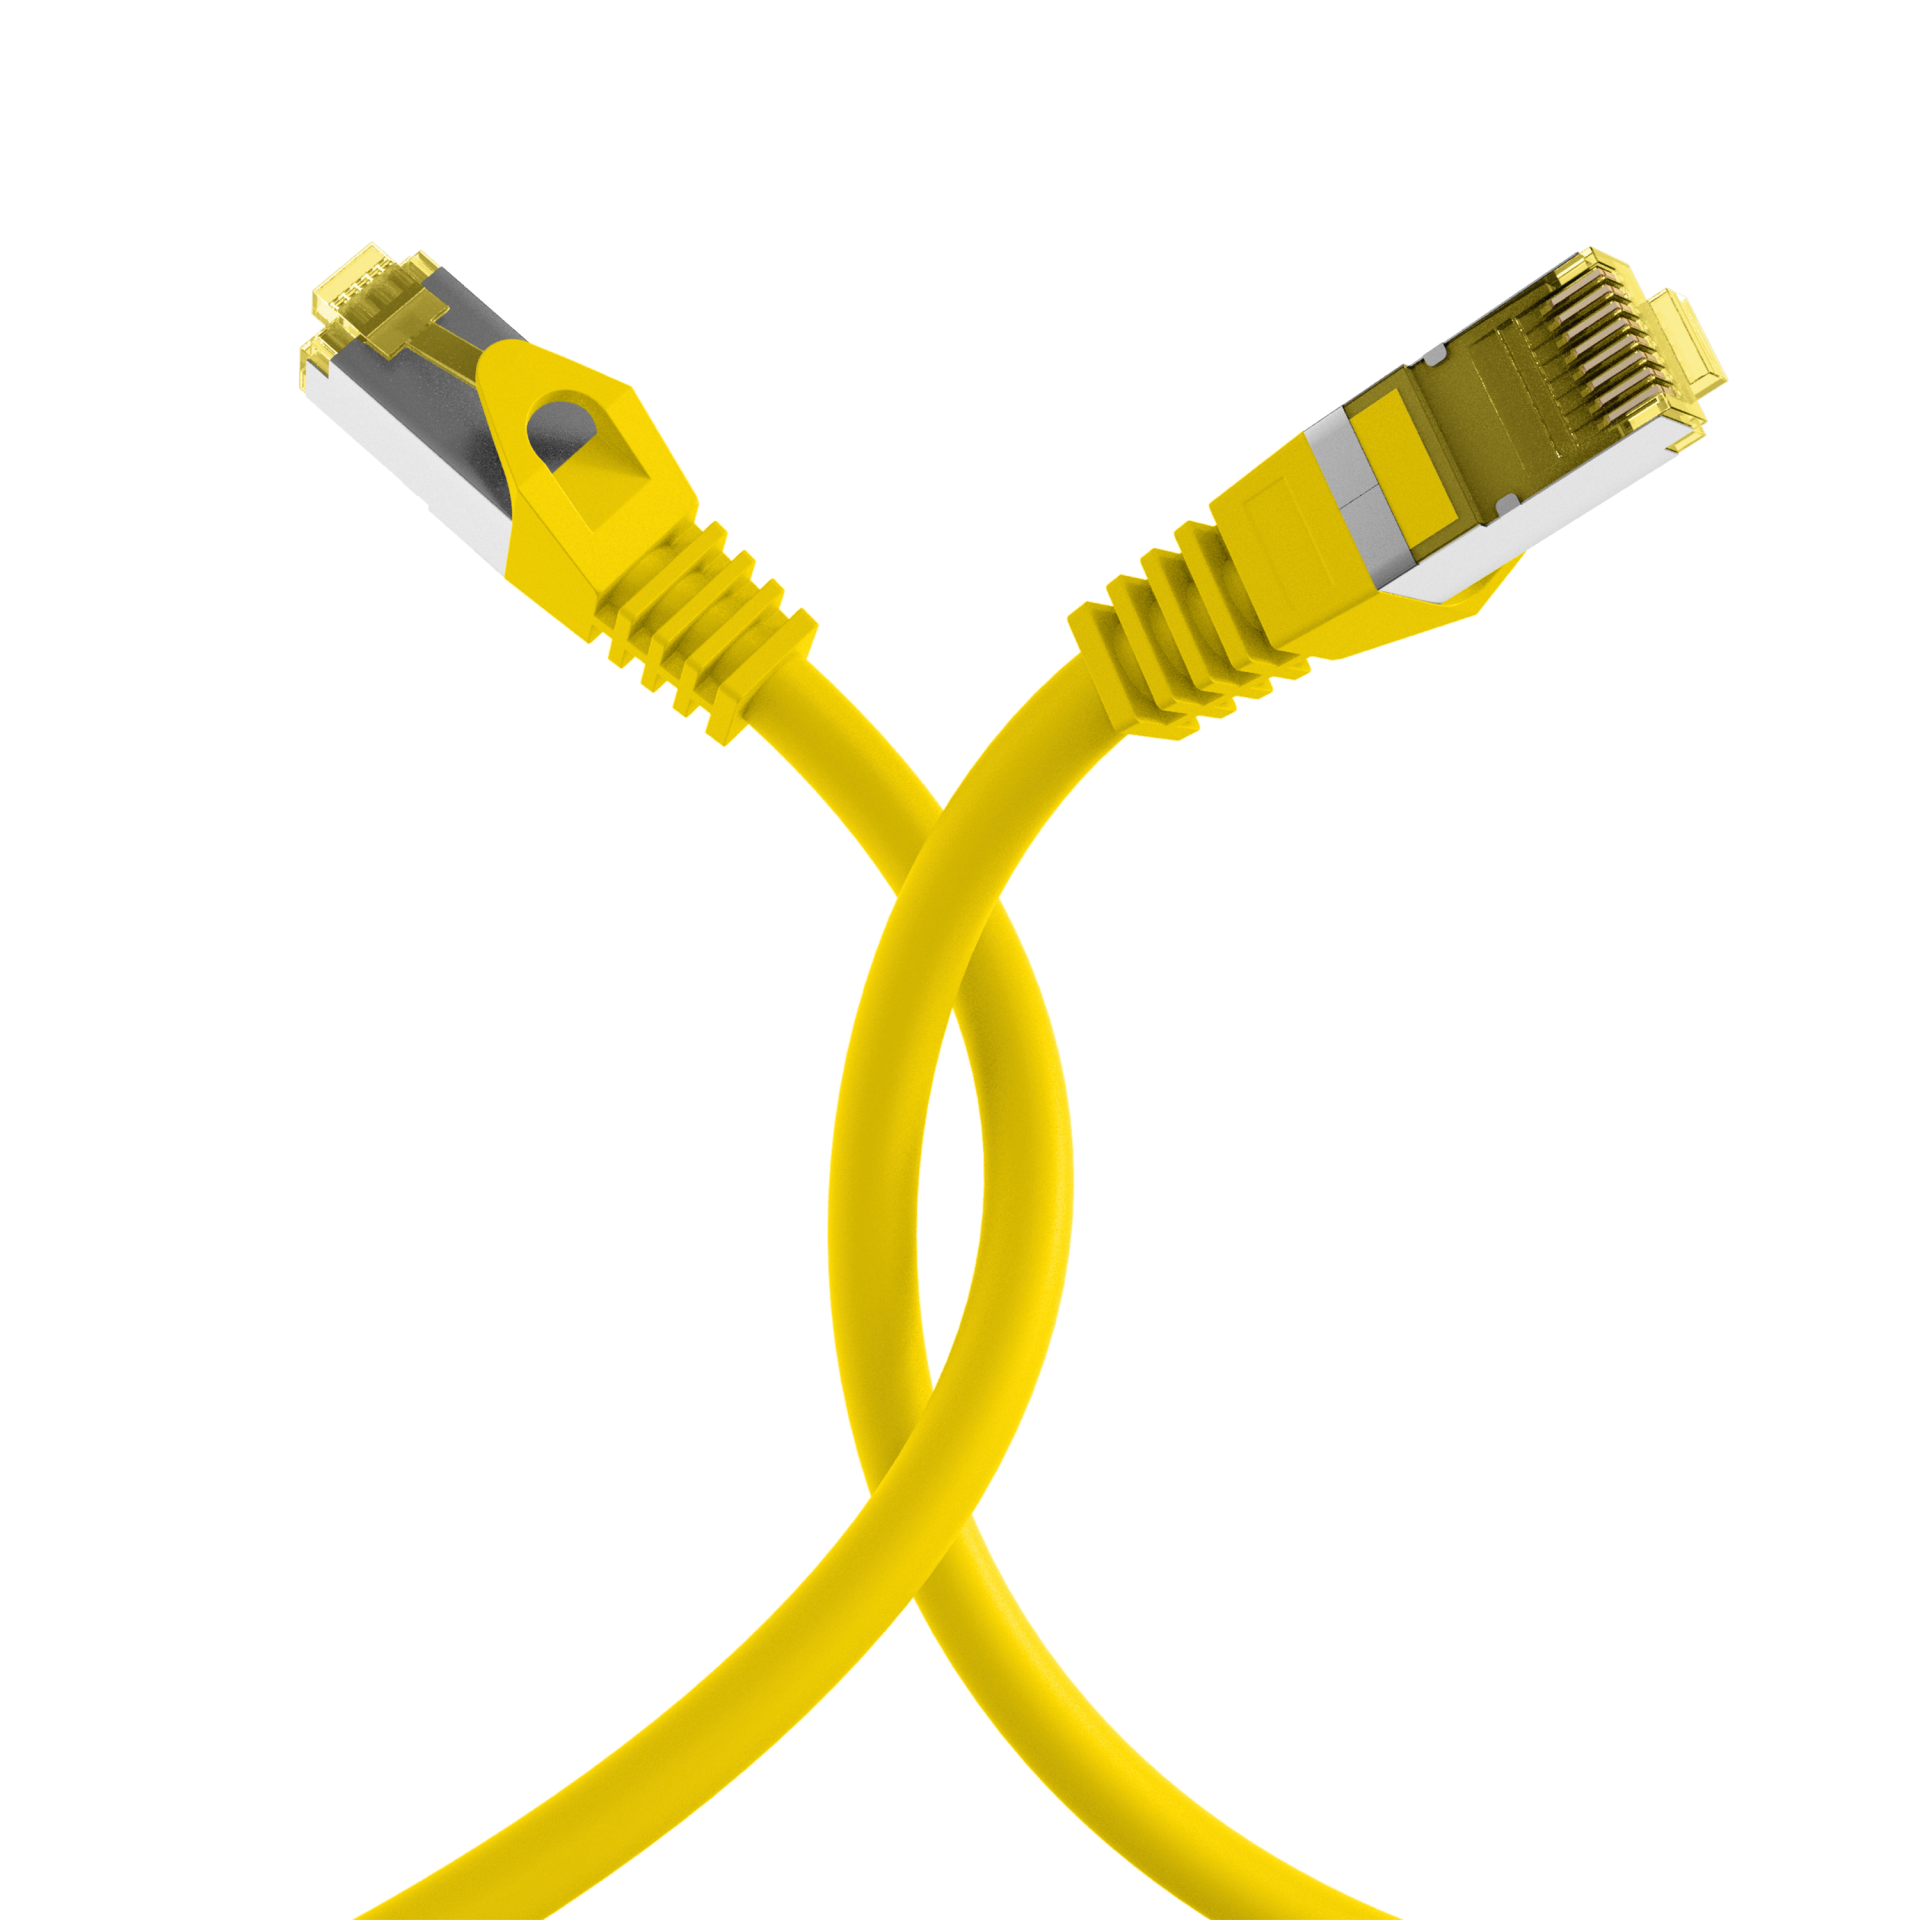 RJ45 Patch cable S/FTP, Cat.6A, LSZH, Cat.7 Raw cable, 0,15m, yellow